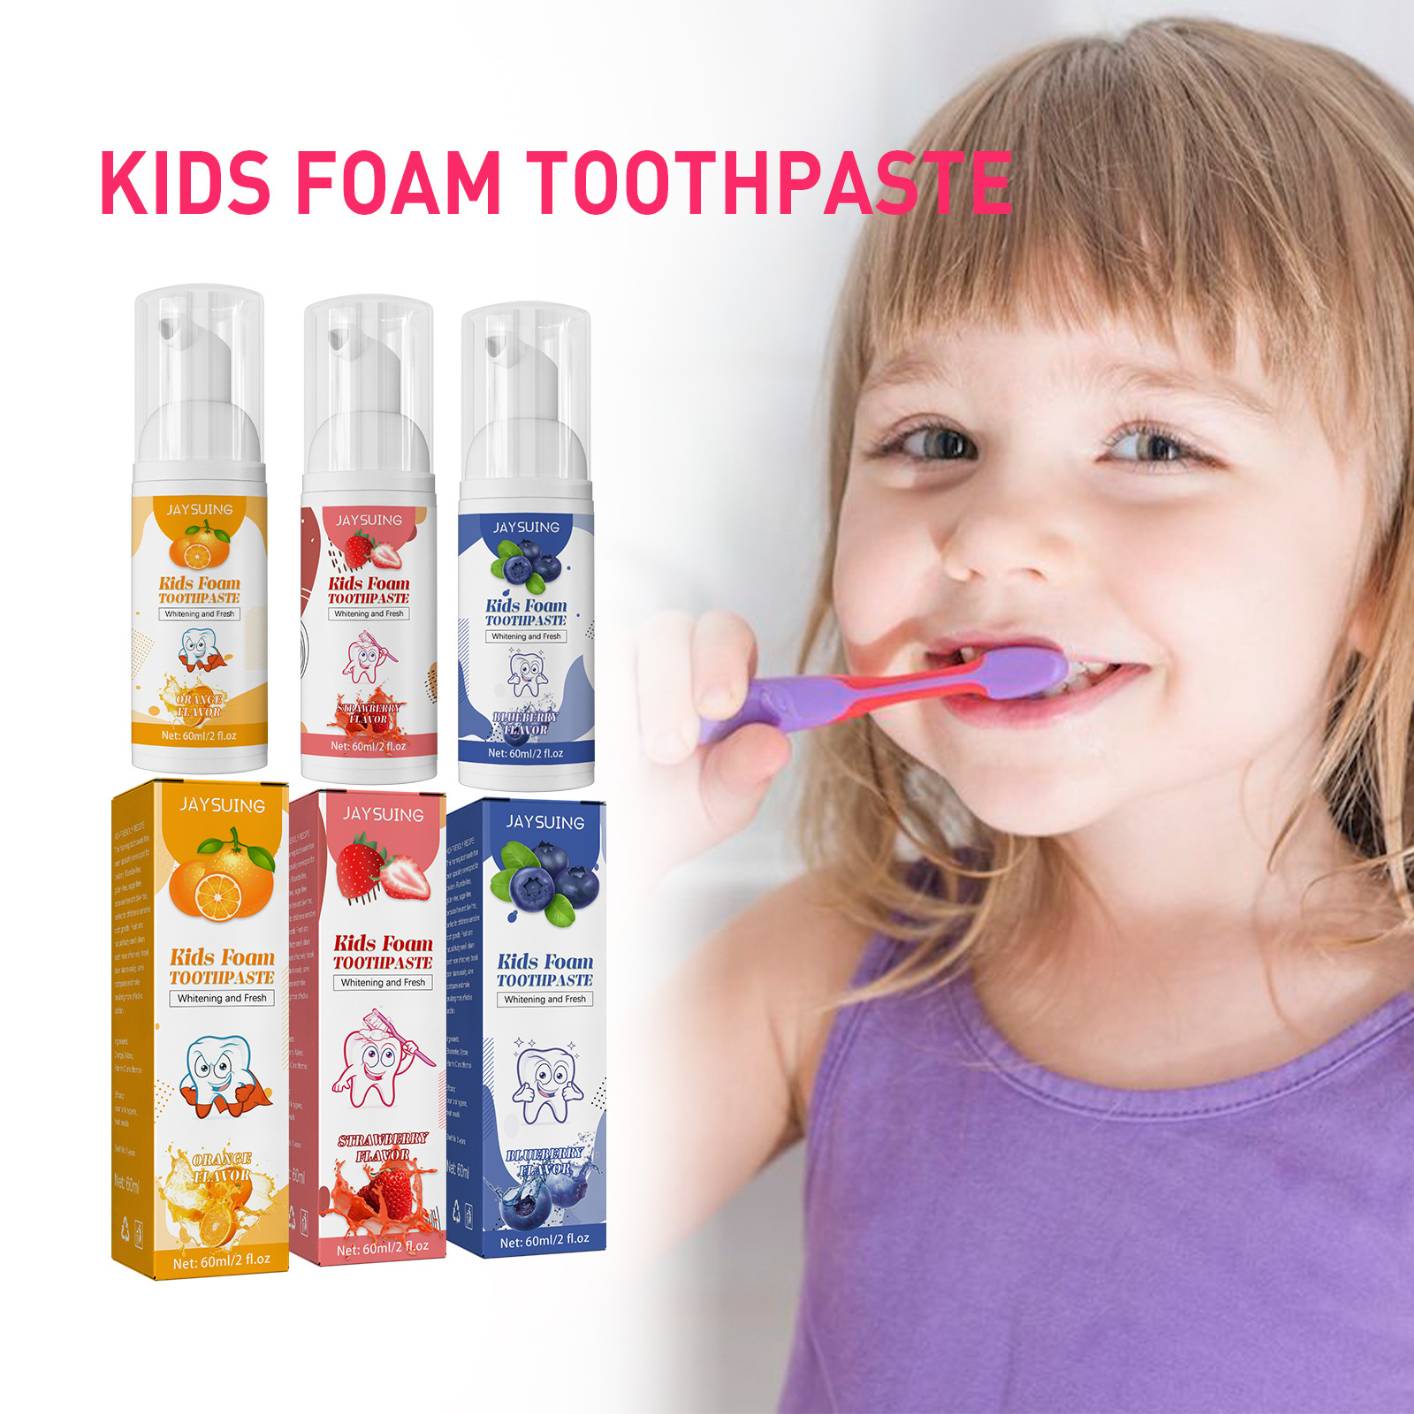 Foam Toothpaste Kids,Toddler Toothpaste with Low Fluoride for U Shaped Toothbrush, Foaming Toothpaste and Mouthwash for Dental Care for Children Kids Age for 3 and Up